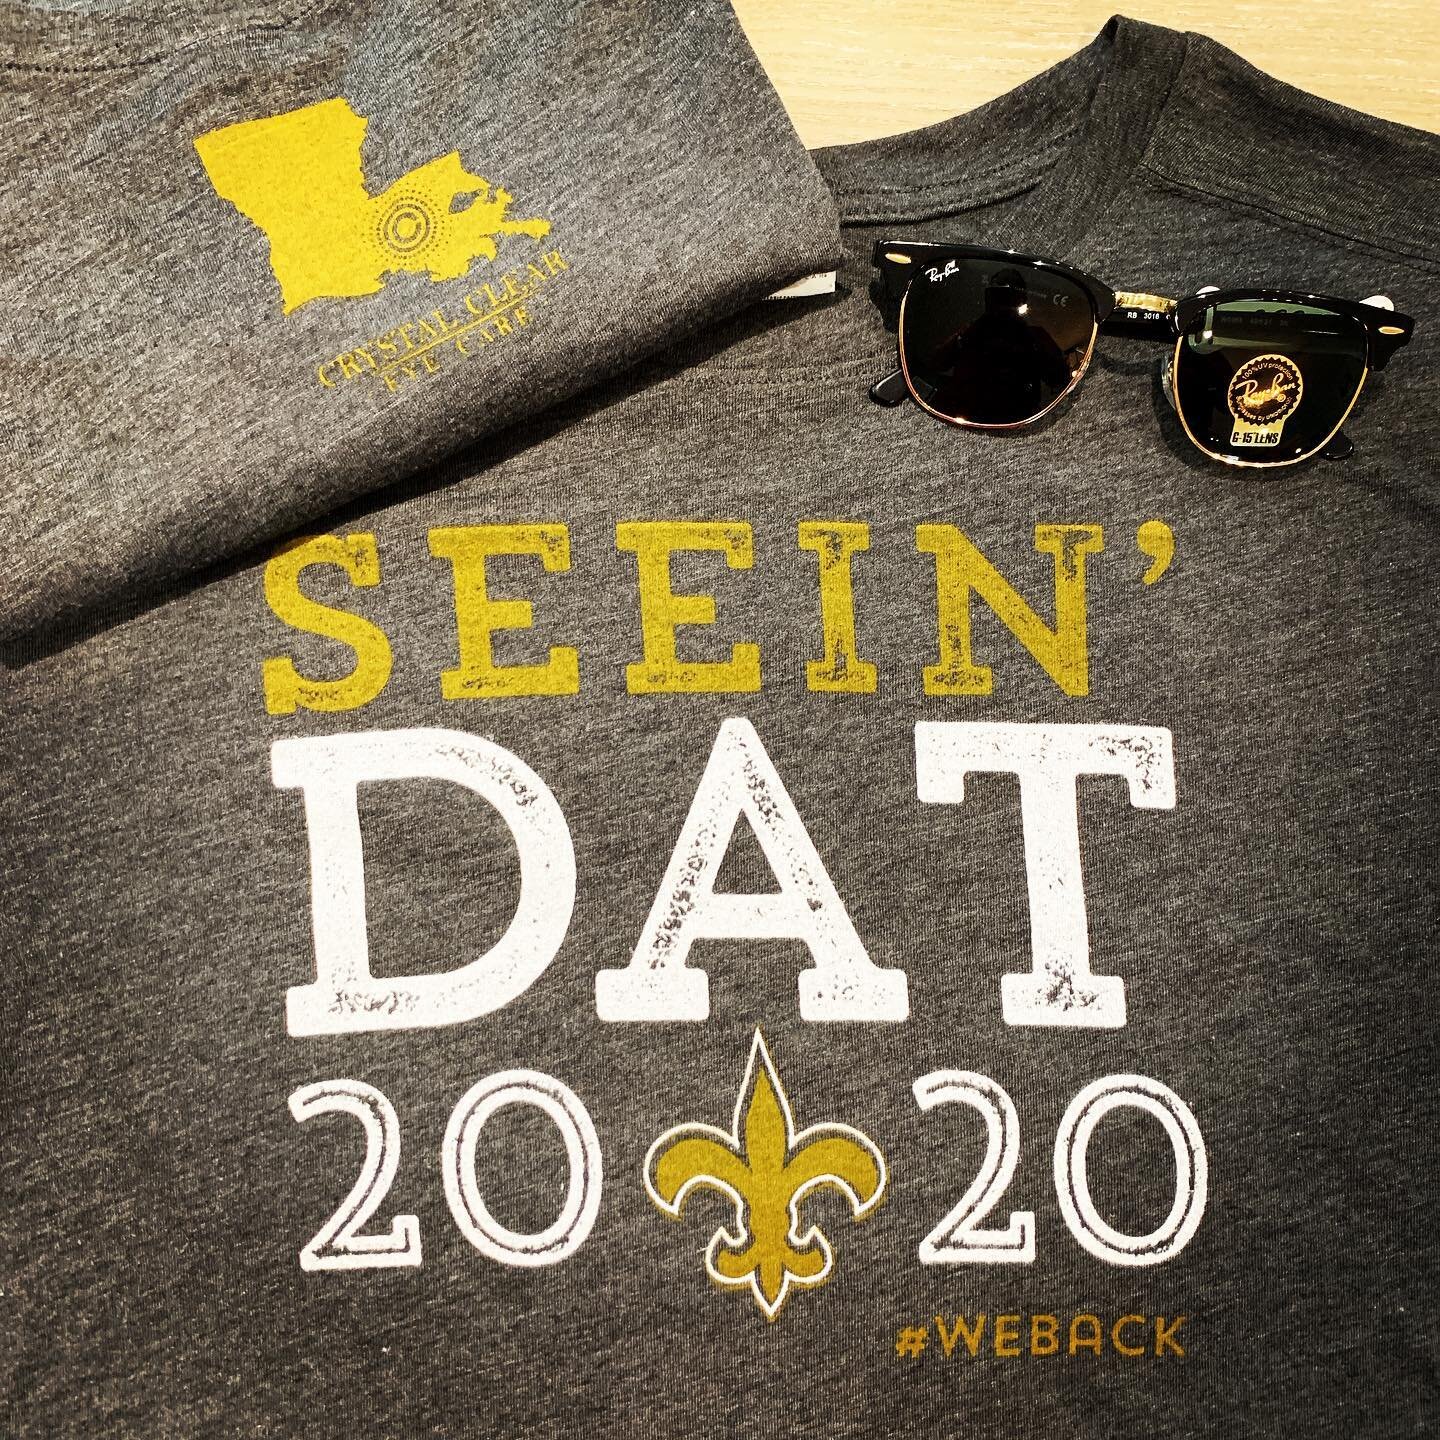 Crystal Clear Eyecare will be closing at Noon on Friday October 4th! Plenty time to come grab your T-shirt and be game day ready!! $15 #seeindat2020 #whodat #blackandgoldtothesuperbowl ⚜️⚜️⚜️